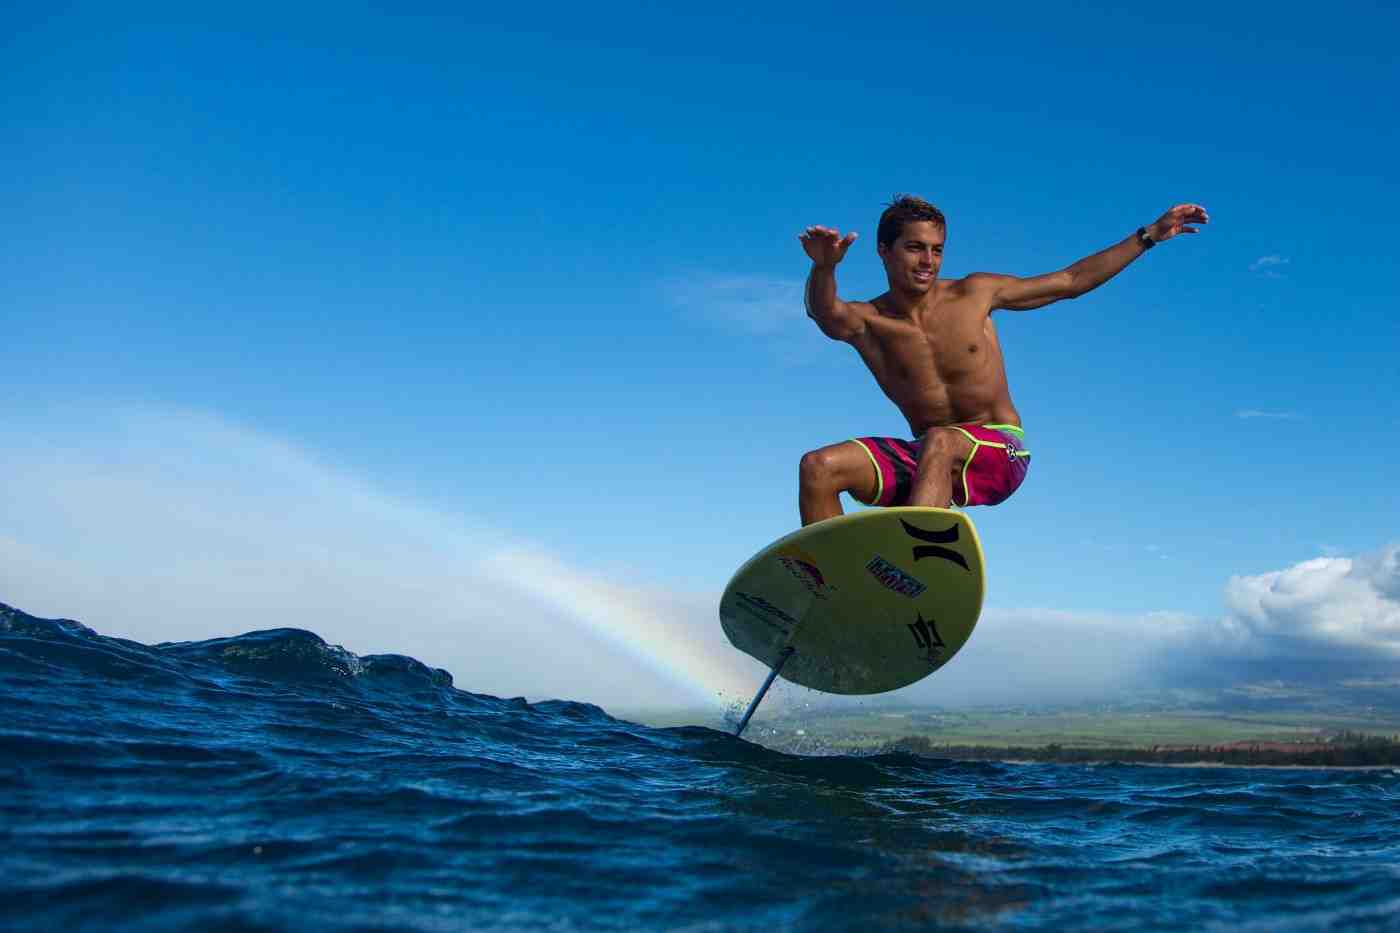 Who is the best surfer in the world?